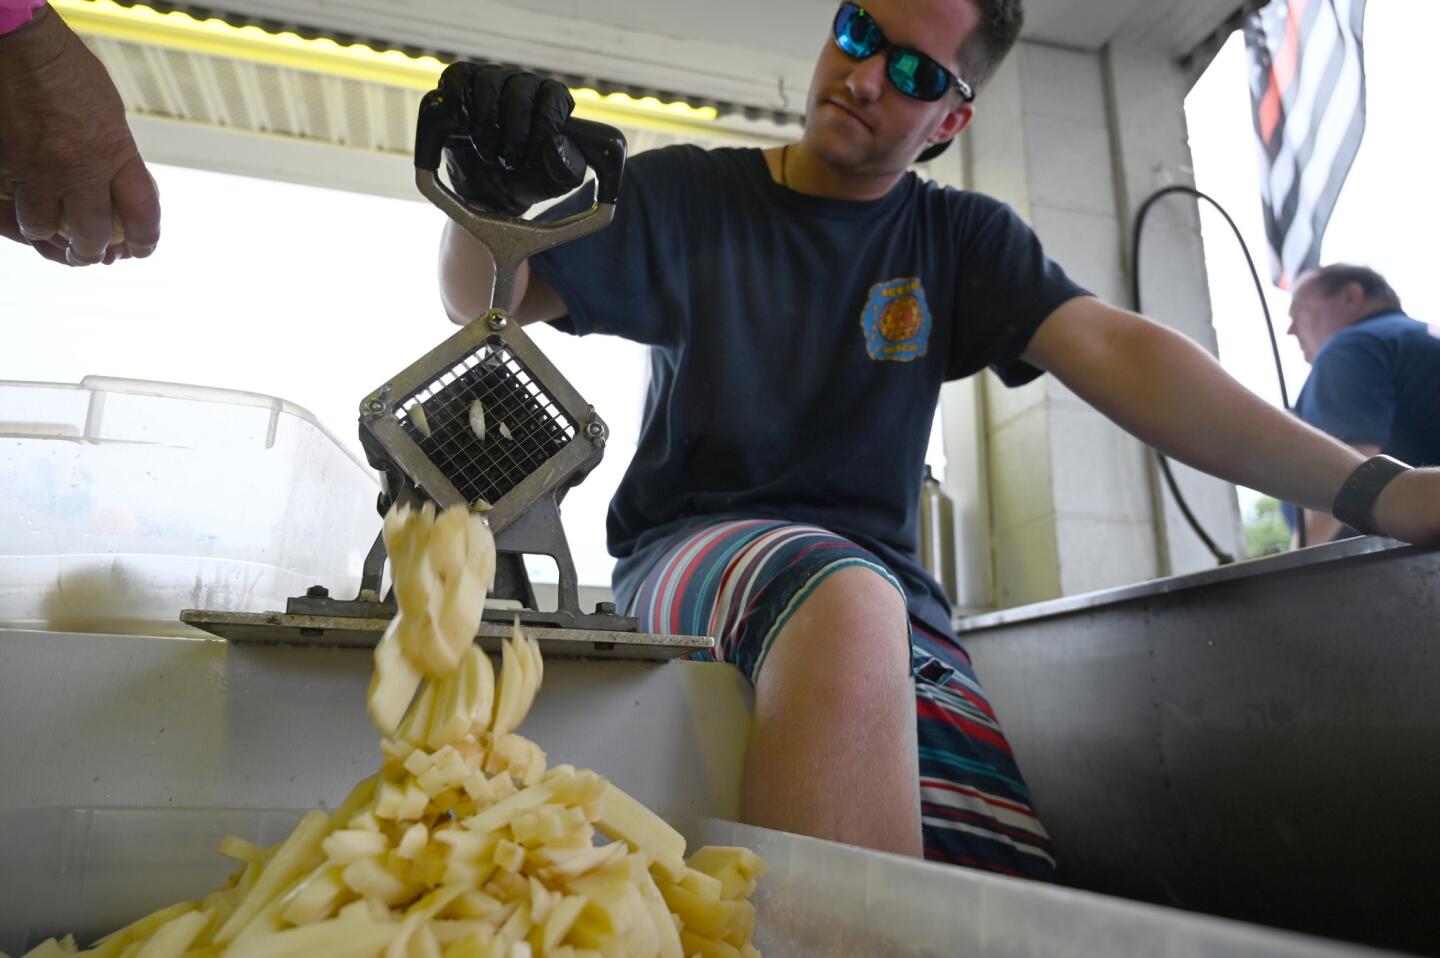 Haden Nugent works on cutting a bucket of peeled potatoes for the purpose of making fries during the carnival at Reese & Community Volunteer Fire Company on Tuesday, July 16.